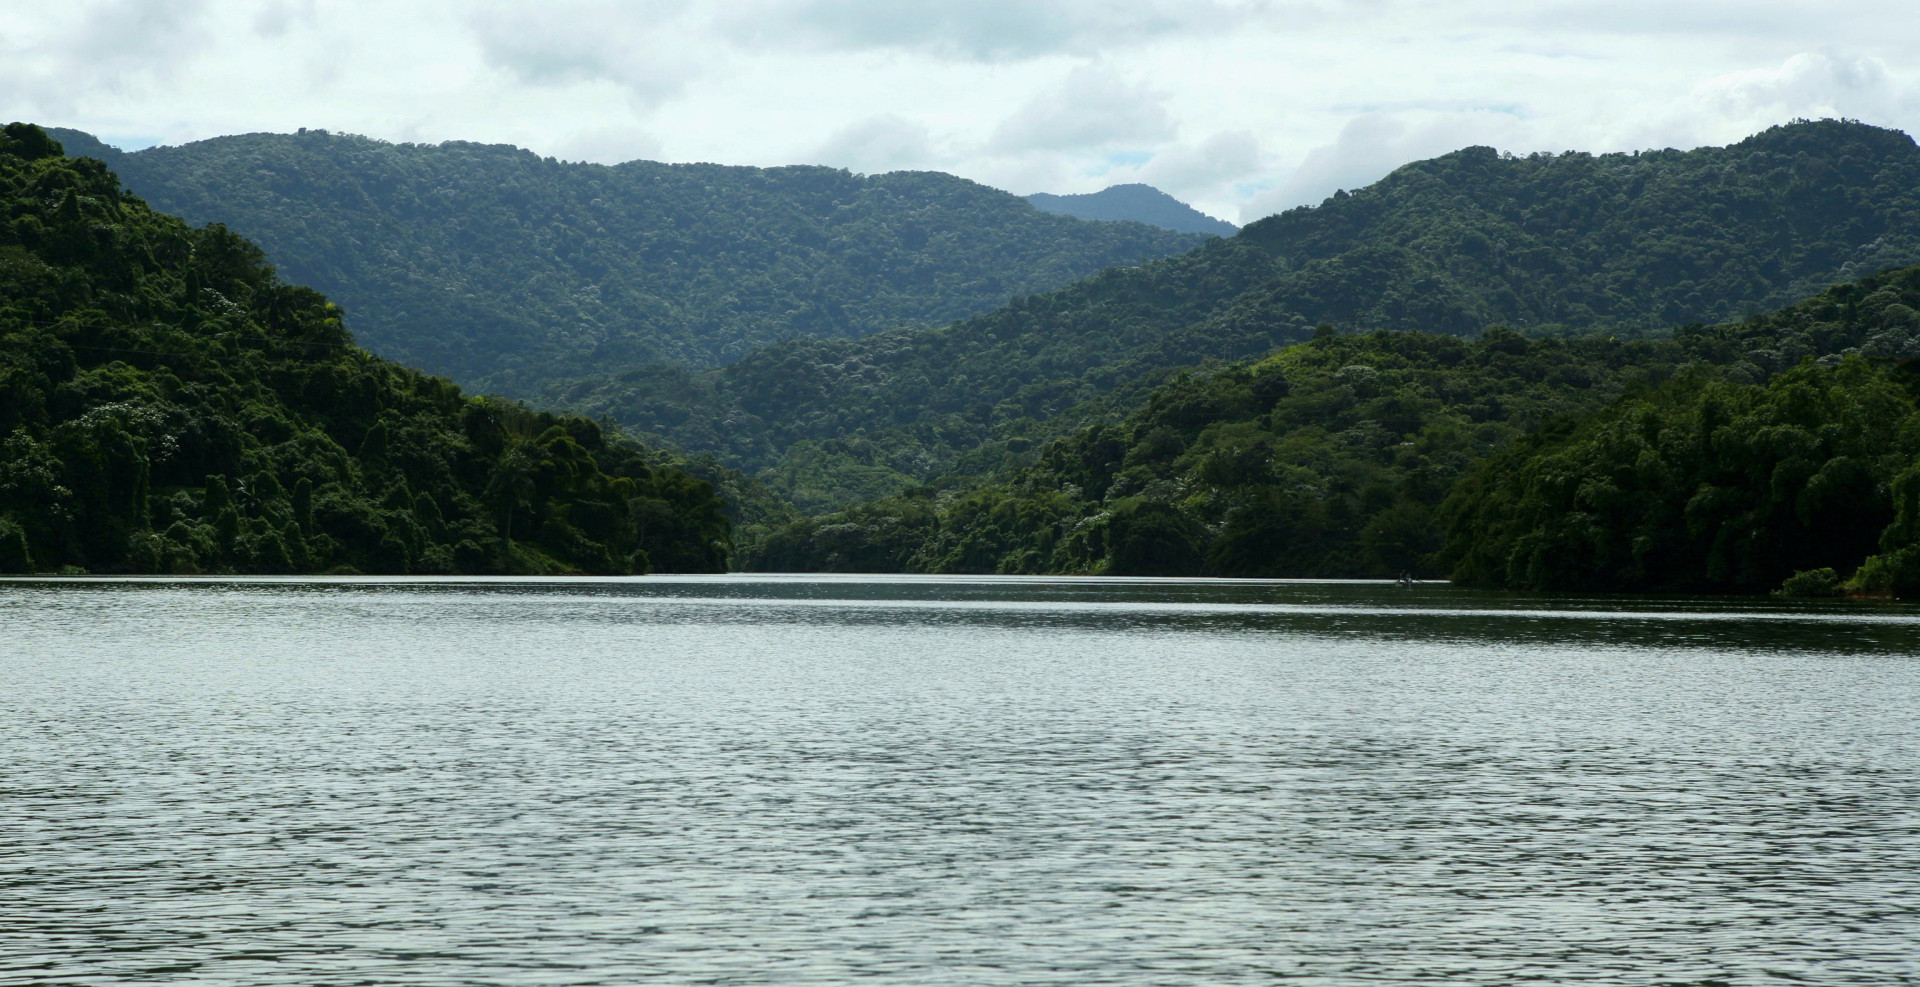 This man-made lake sits in the center of the island, between Arecibo and Utuado. Built in 1942, it's one of the island’s drinkable water reserves. Don’t worry about packing lunch. The lake has numerous open-air restaurants where you can eat while soaking in the views.<p>You may also like:<a href="https://www.starsinsider.com/n/375906?utm_source=msn.com&utm_medium=display&utm_campaign=referral_description&utm_content=173131en-us"> Get in shape in 30 days with these 7-minute workouts</a></p>